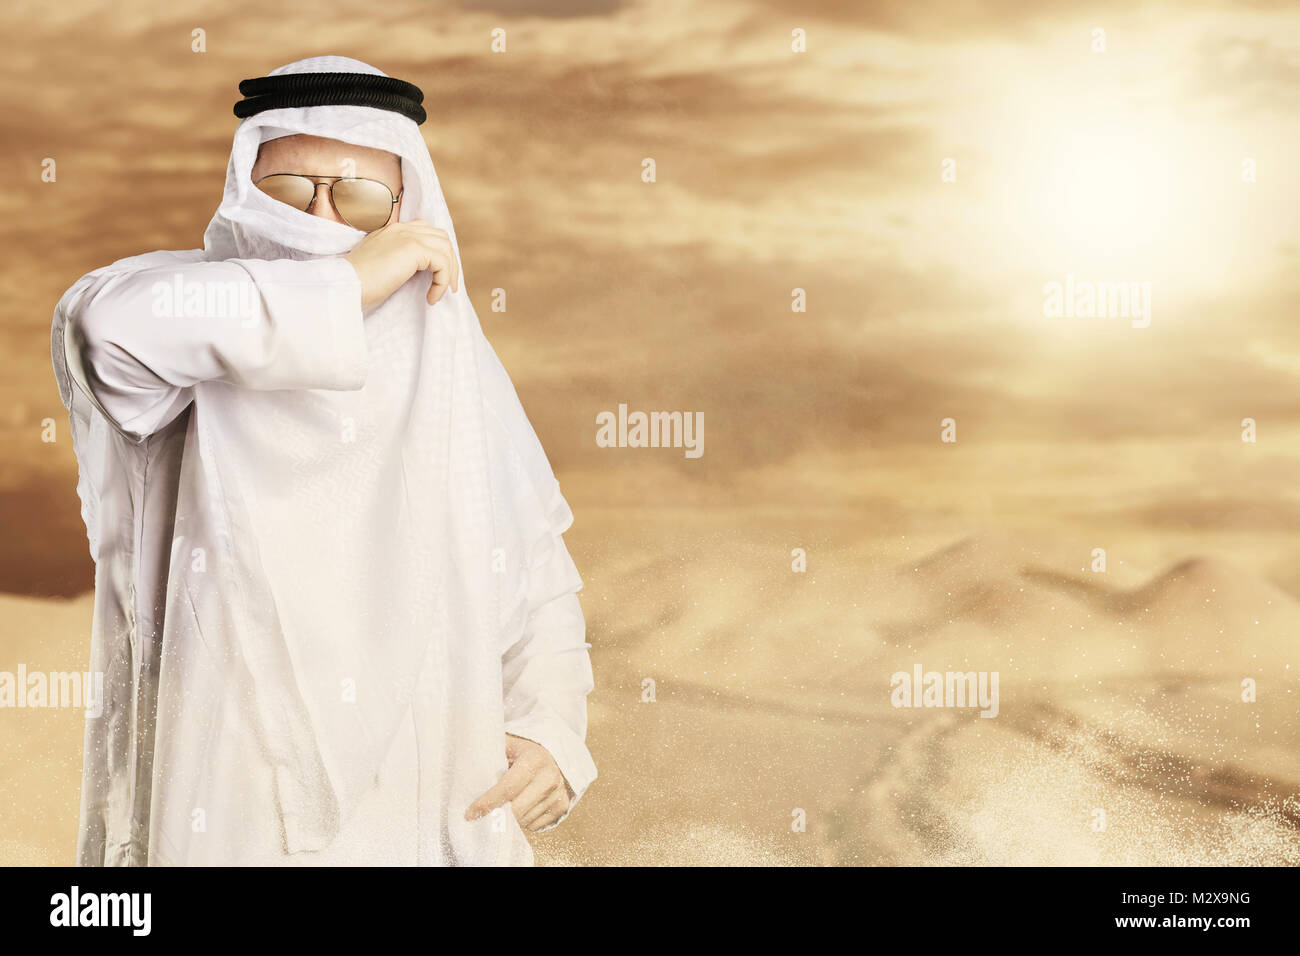 sheik protect with keffiyeh from desert storm in front of sunlight Stock Photo